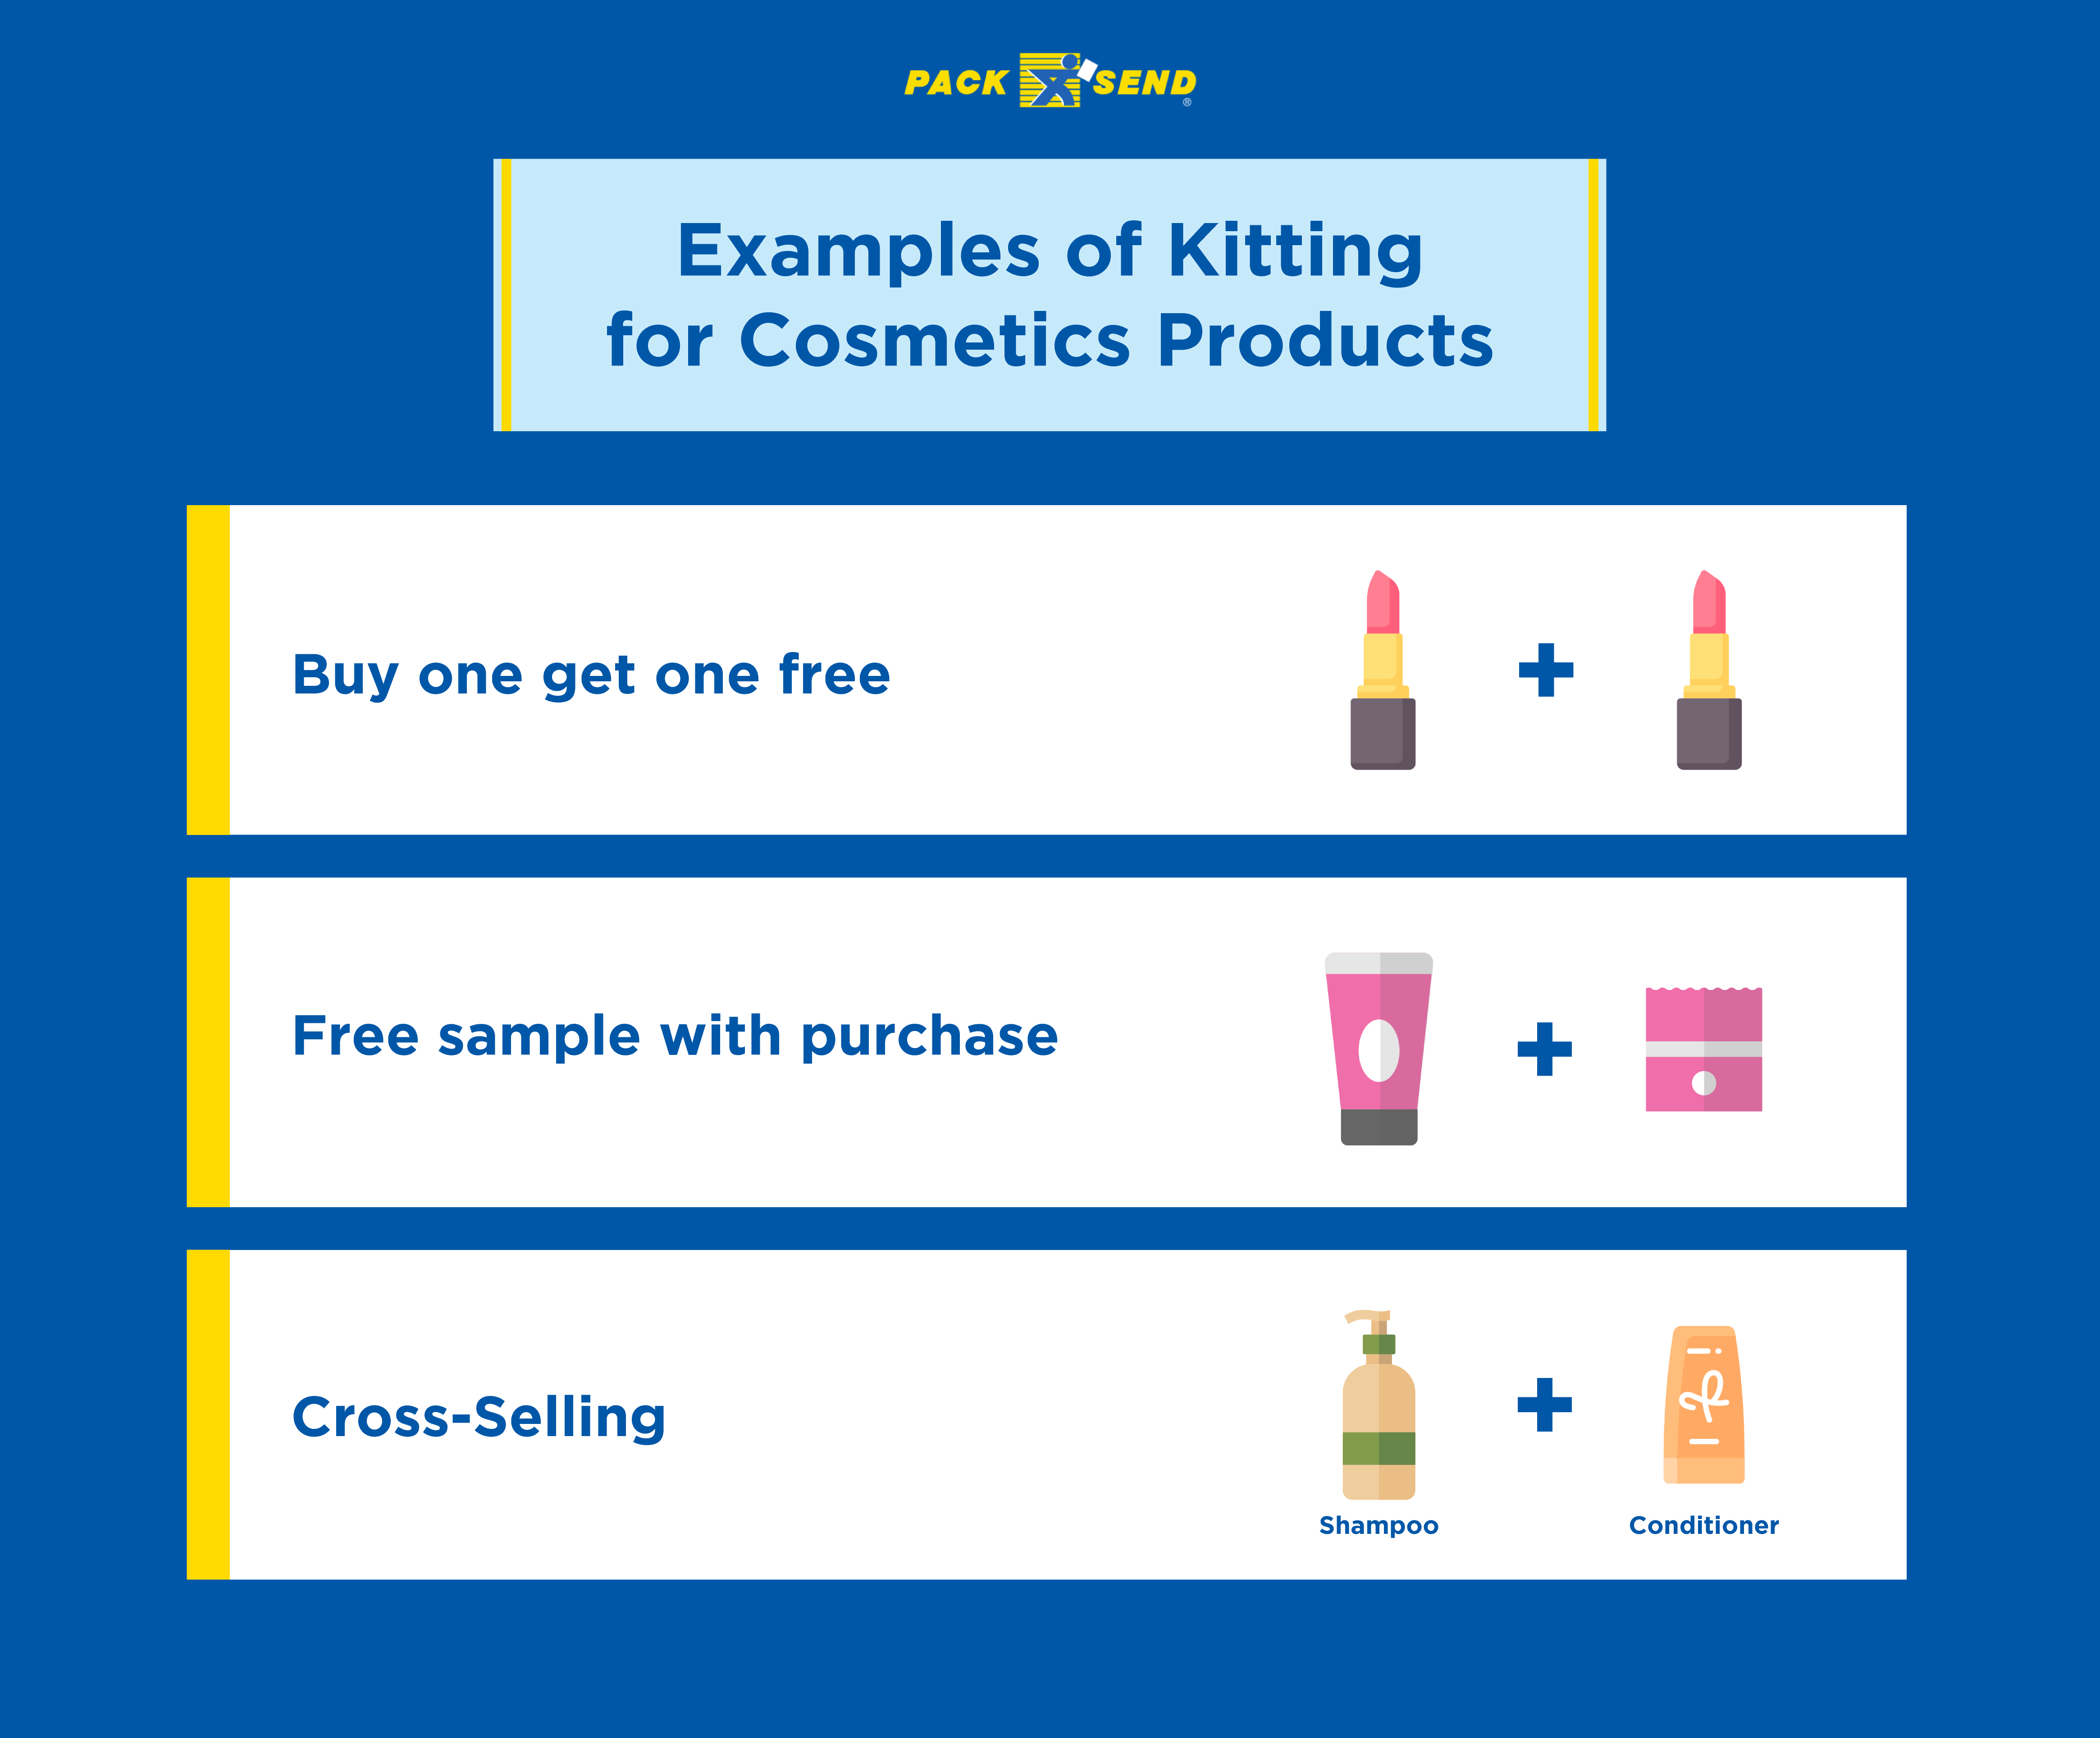 Examples of kitting for cosmetics products